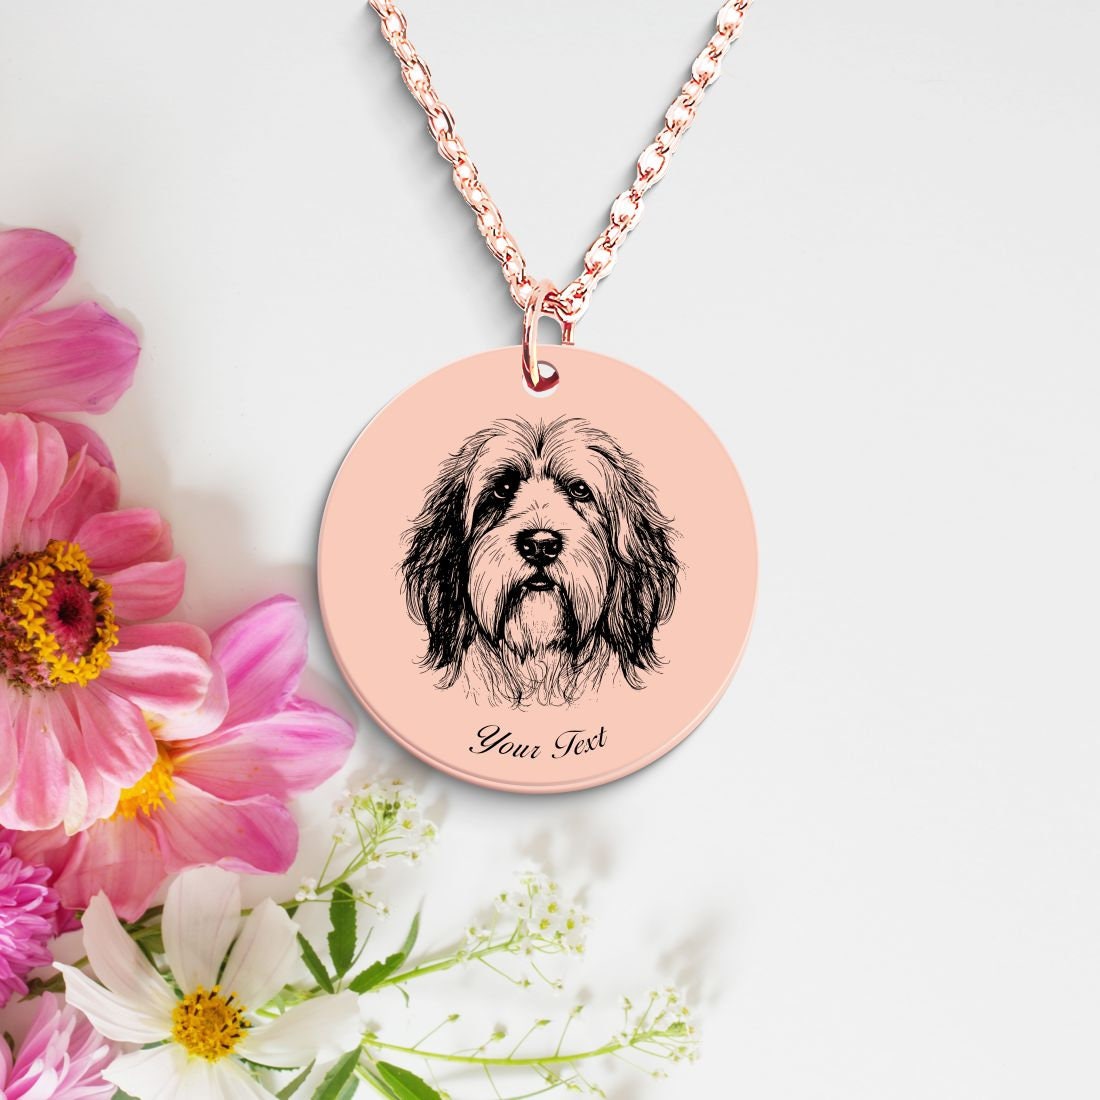 Bearded Collie Portrait Necklace - Personalizable Jewelry